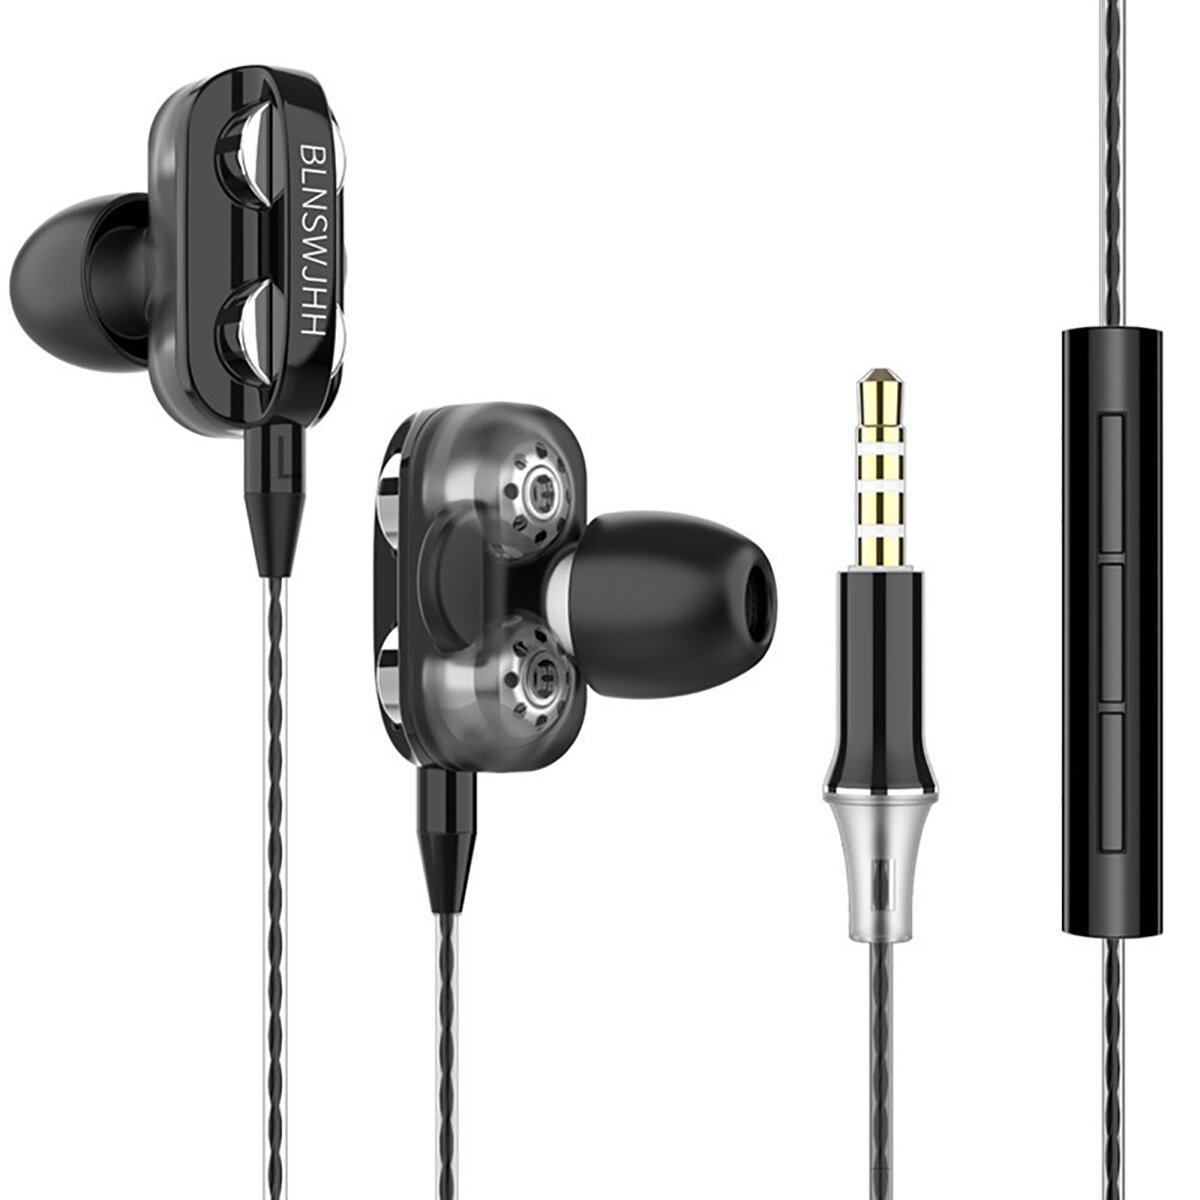 

Bakeey A4 Wired Headphones Dual Dynamic Drivers 4 Speakers HIFI Noise Reduction Headset Line-Control In-Ear Earphones